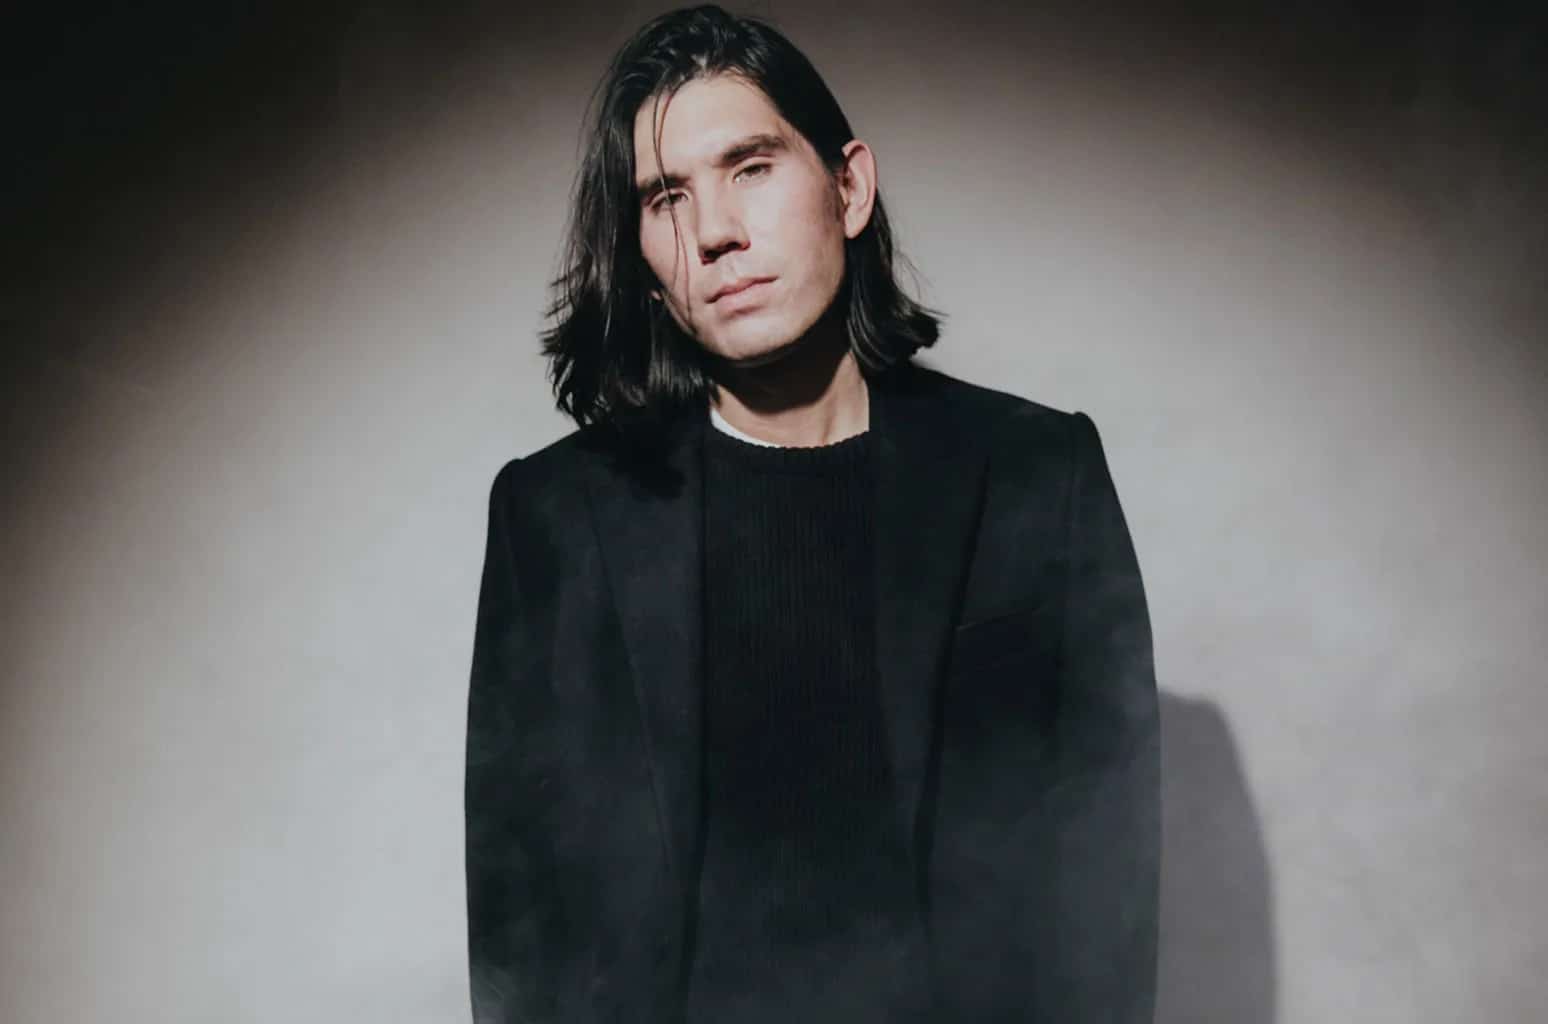 Gryffin sets Red Rocks Ablaze with a Double Dose of Musical Magic: October 24 and 25